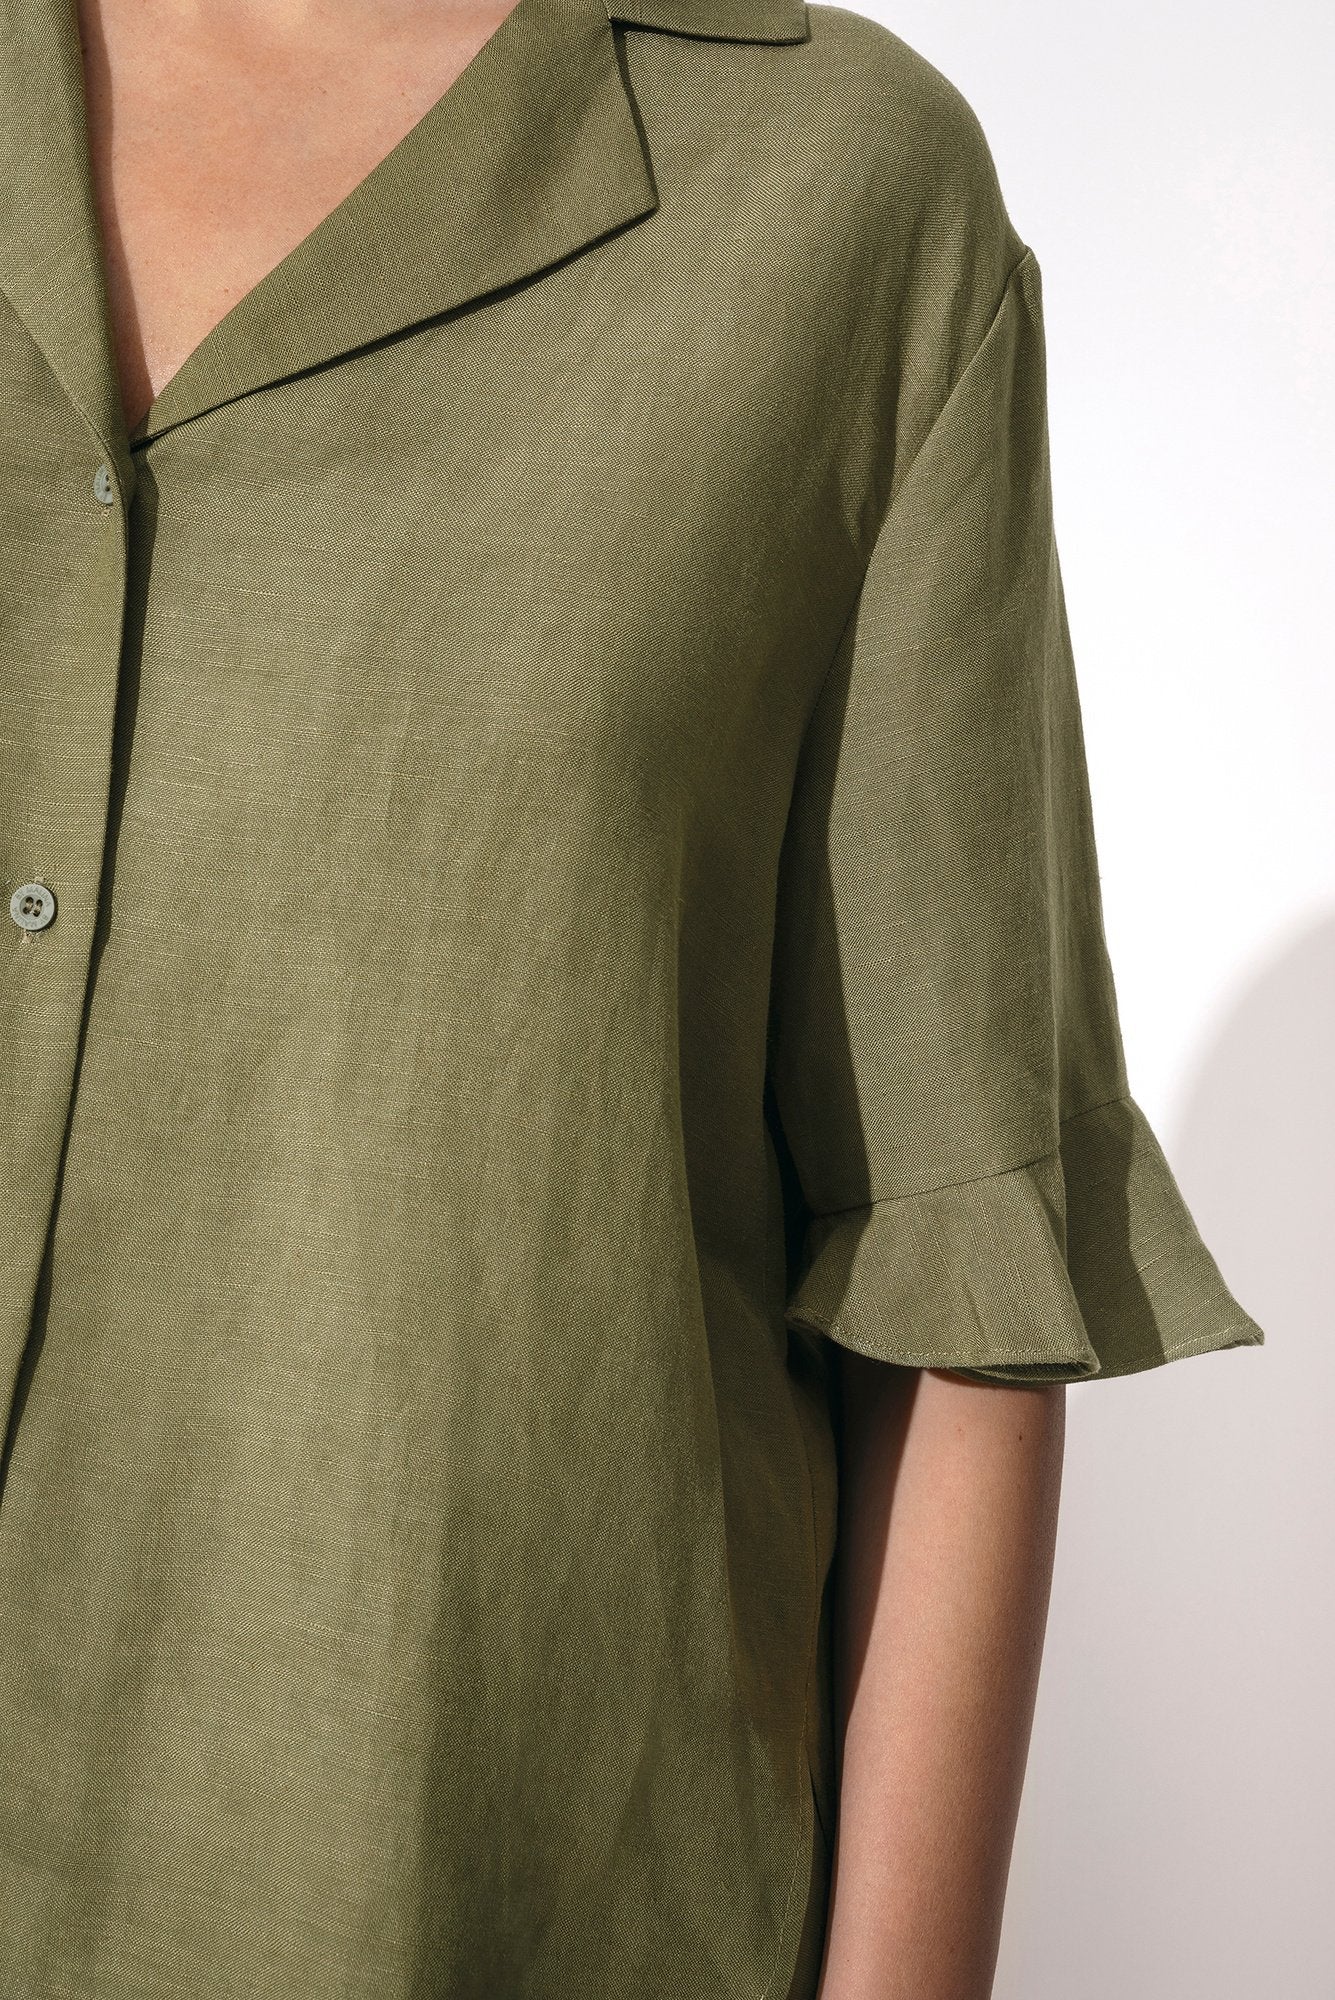 By Malina Elie Shirt in Olive *LAST ONE!*